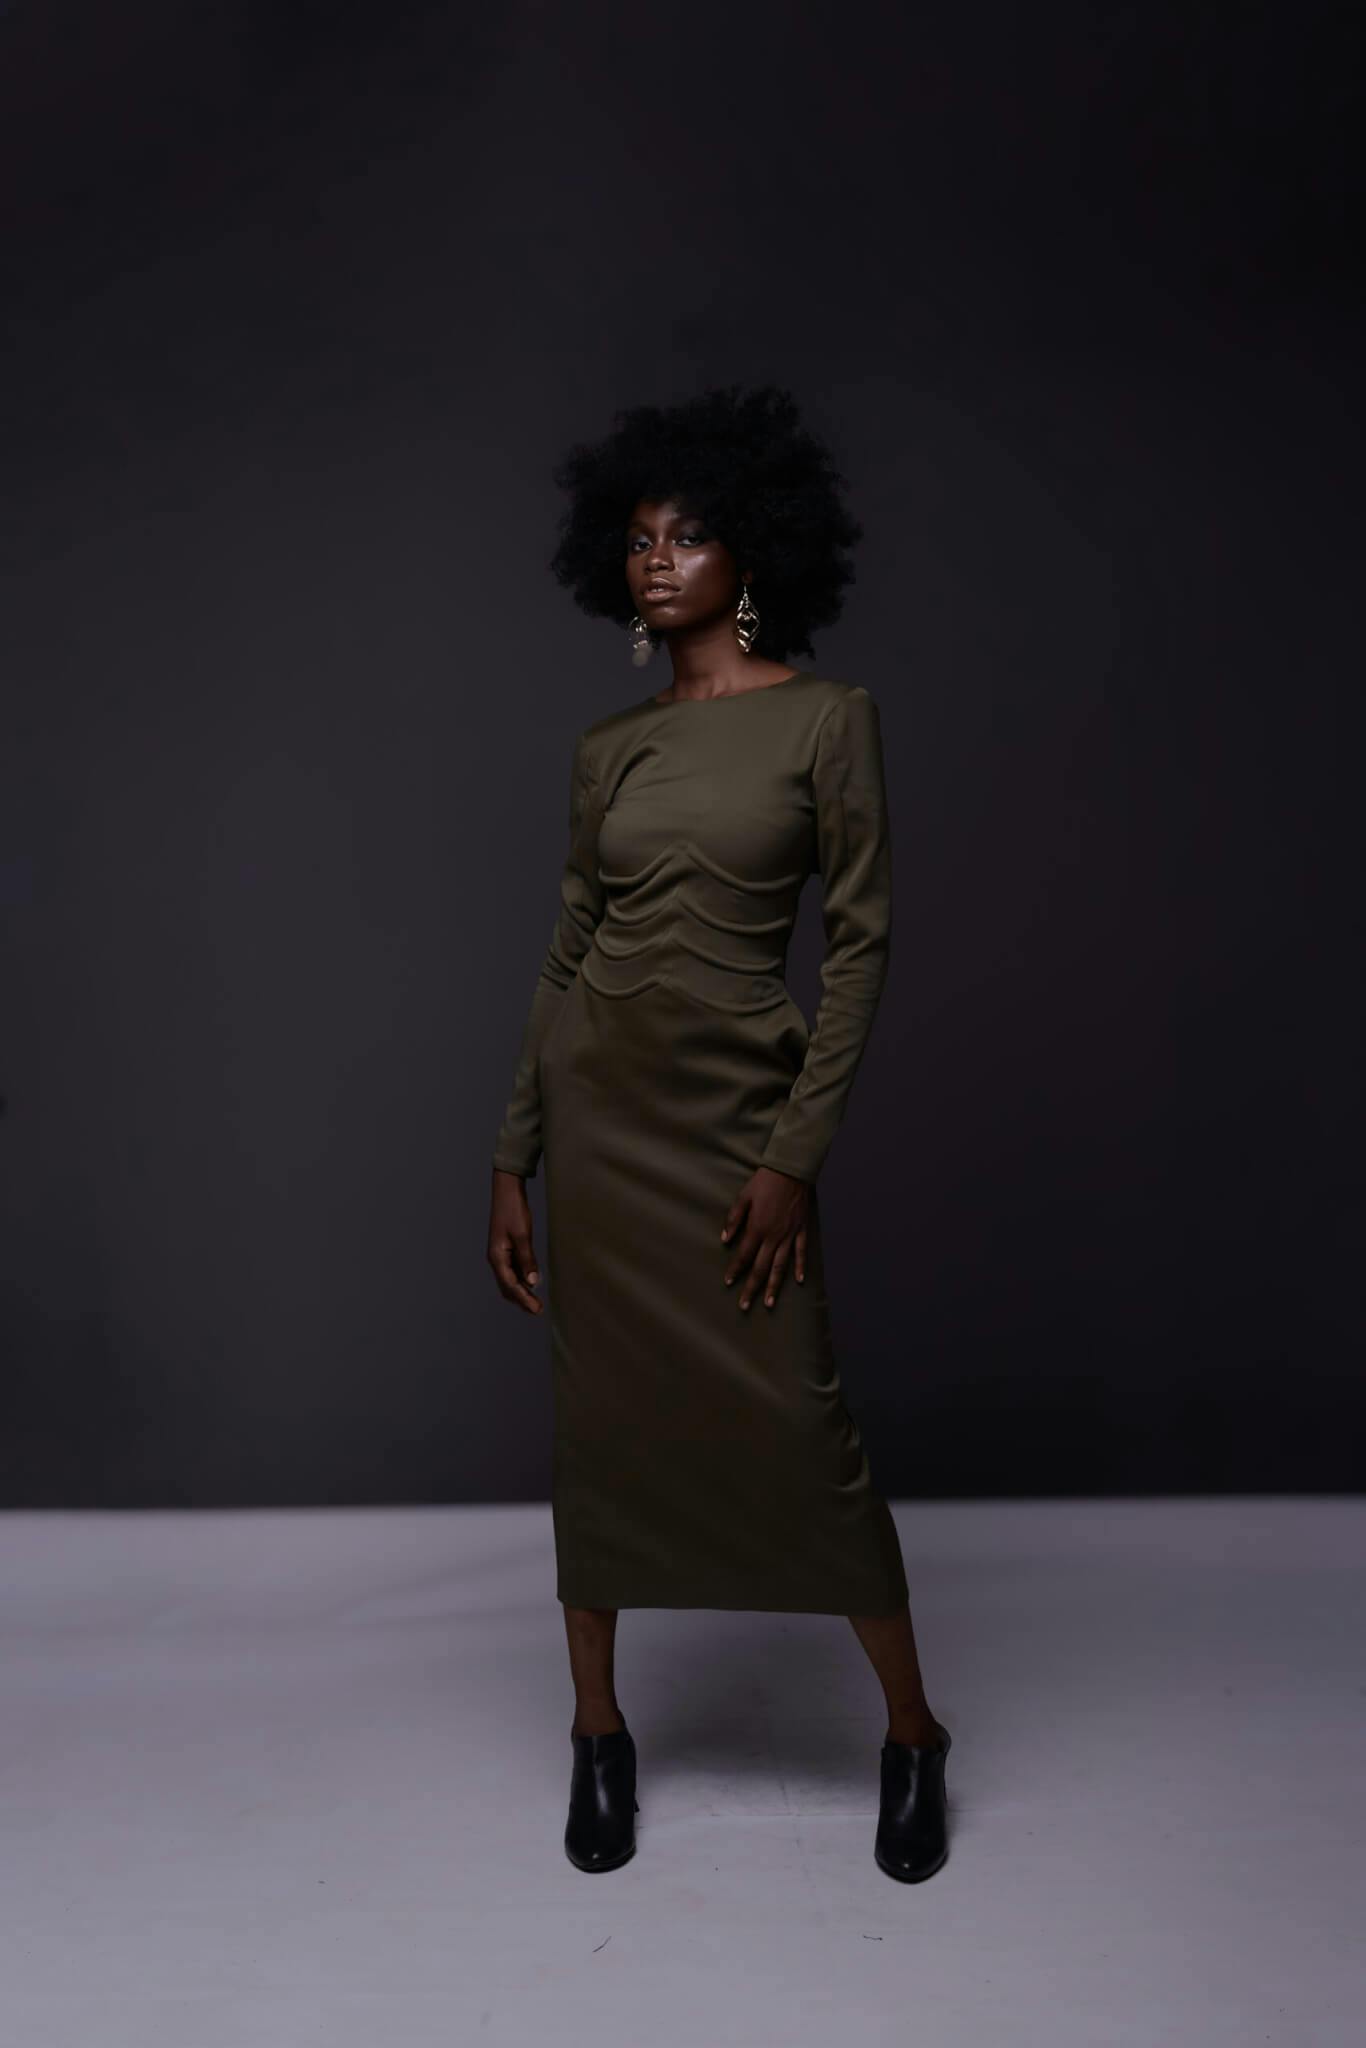 The Gompa ribbed dress, a product by Joseph Ejiro